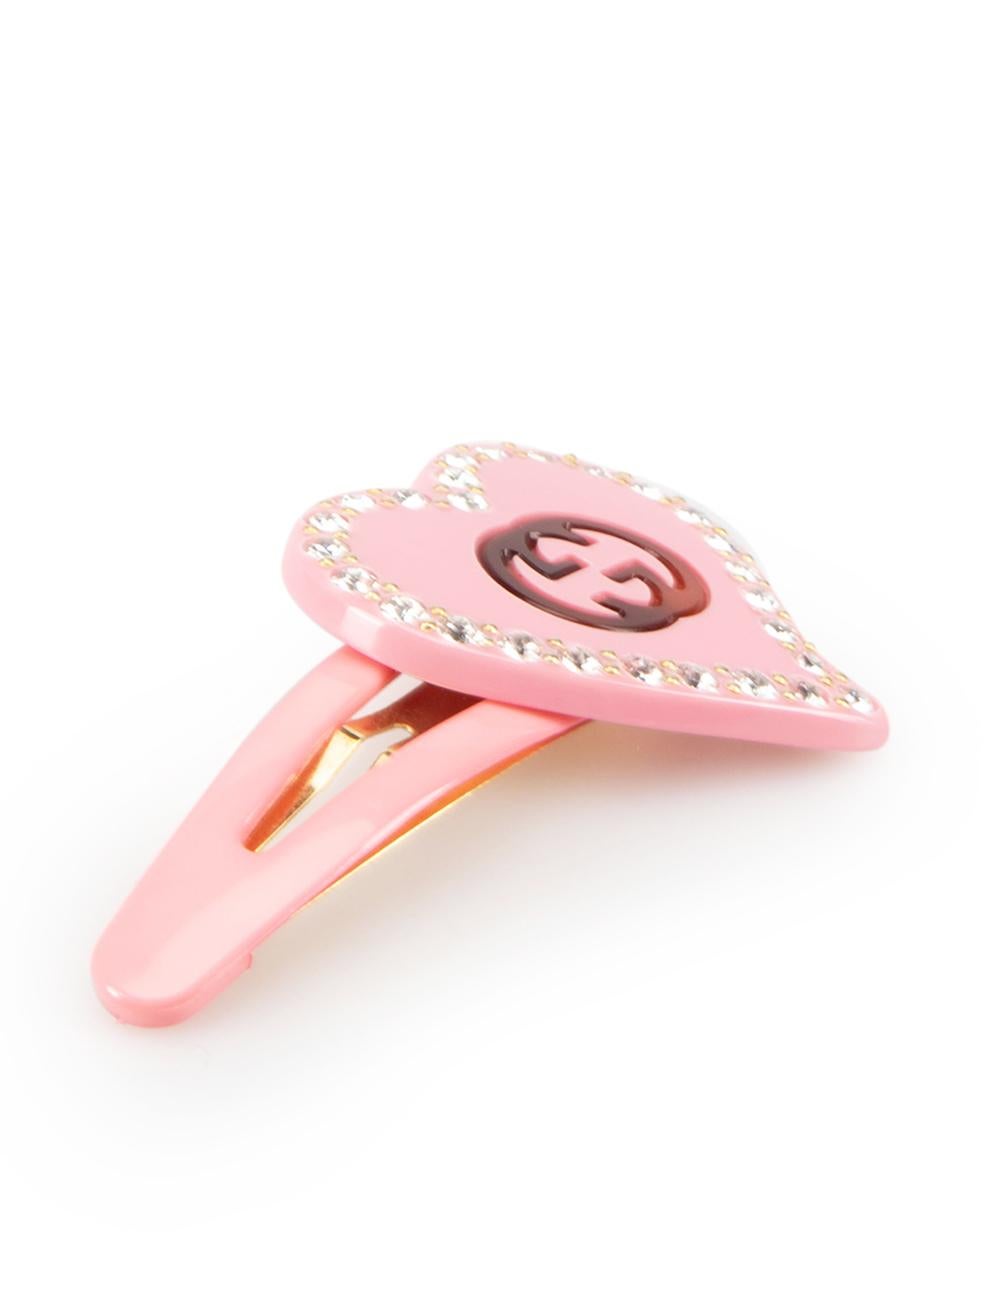 CONDITION is Very good. Hardly any visible wear to hair accessory is evident on this used Gucci designer resale item.



Details


Pink

Plastic

Hair clip

Heart shape

Silver crystal embellished

Brown 'GG' logo



 

Made in